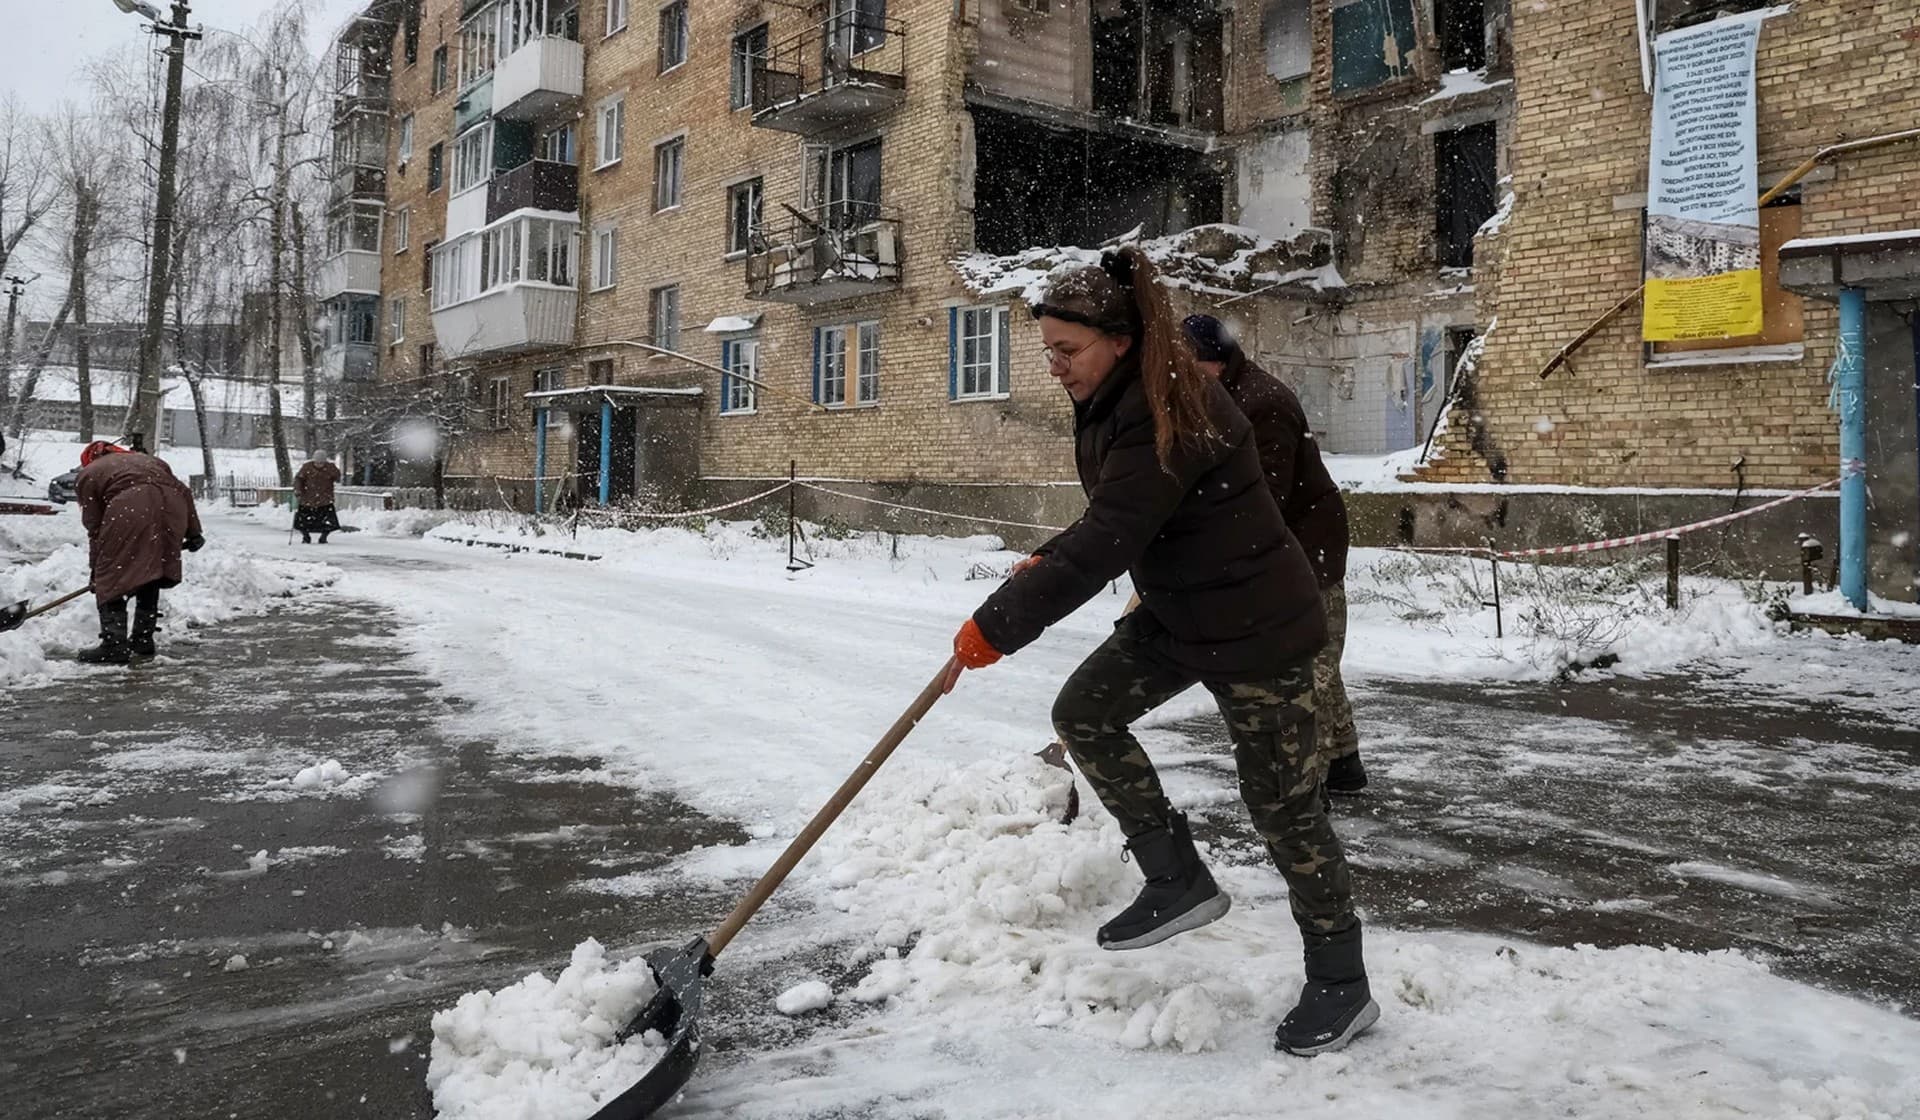 Local resident Tetiana Reznychenko, 43, shovels snow near her destroyed building, which has no electricity, heating and water, in the village of Horenka